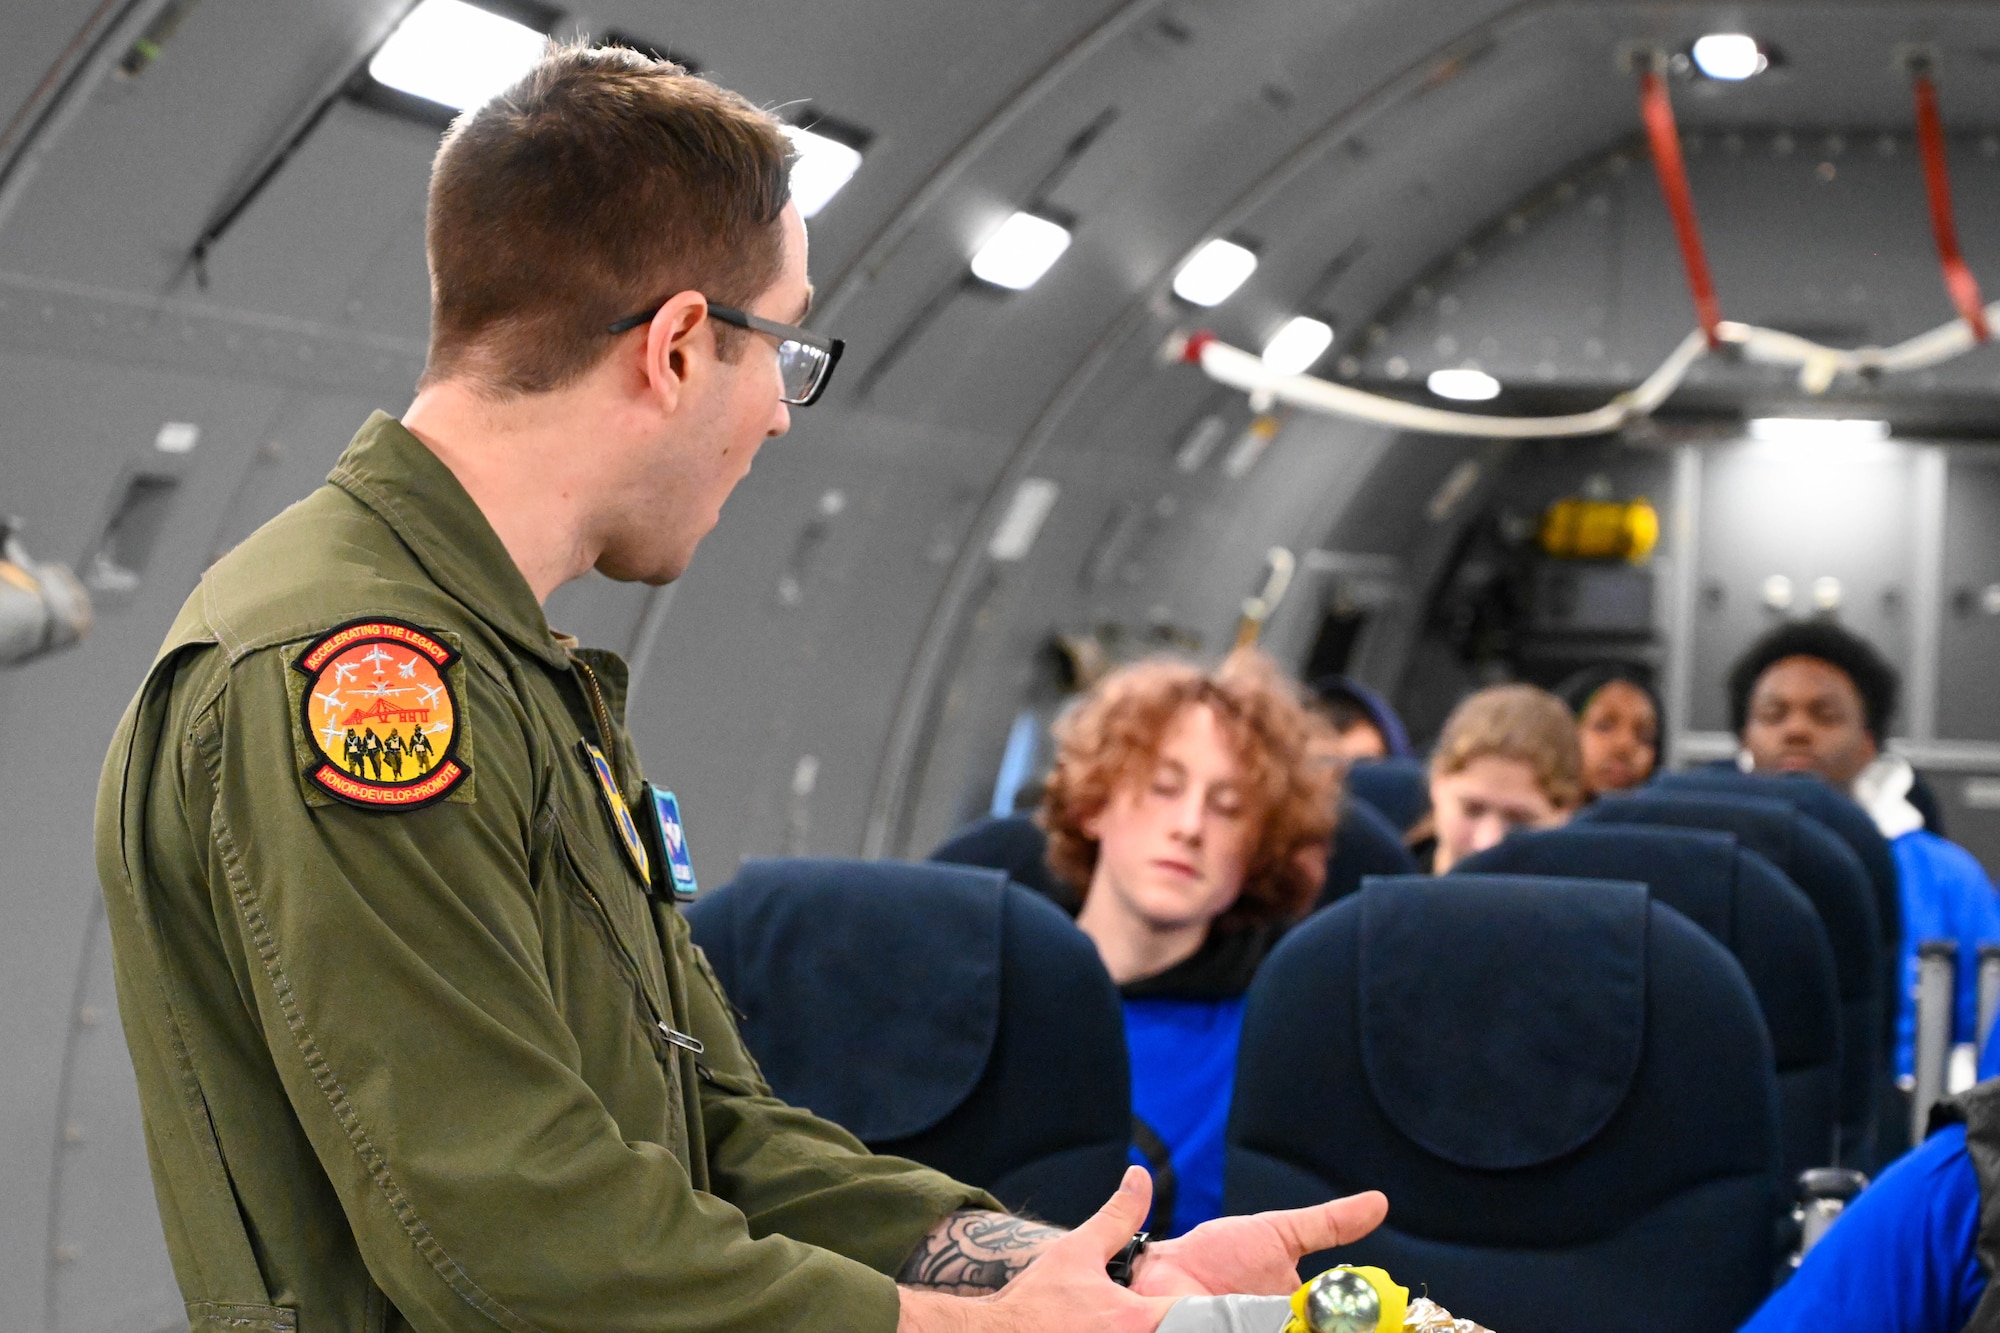 U.S. Air Force Tech. Sgt. Jesse Barber, 56th Air Refueling Squadron boom operator instructor, gives a pre-flight brief to Legacy Flight Academy students at Joint Base Charleston, South Carolina, Feb. 18, 2023. The students spent the day enhancing their STEM knowledge and learning about aerospace-focused military career opportunities. (U.S. Air Force photo by Senior Airman Trenton Jancze)